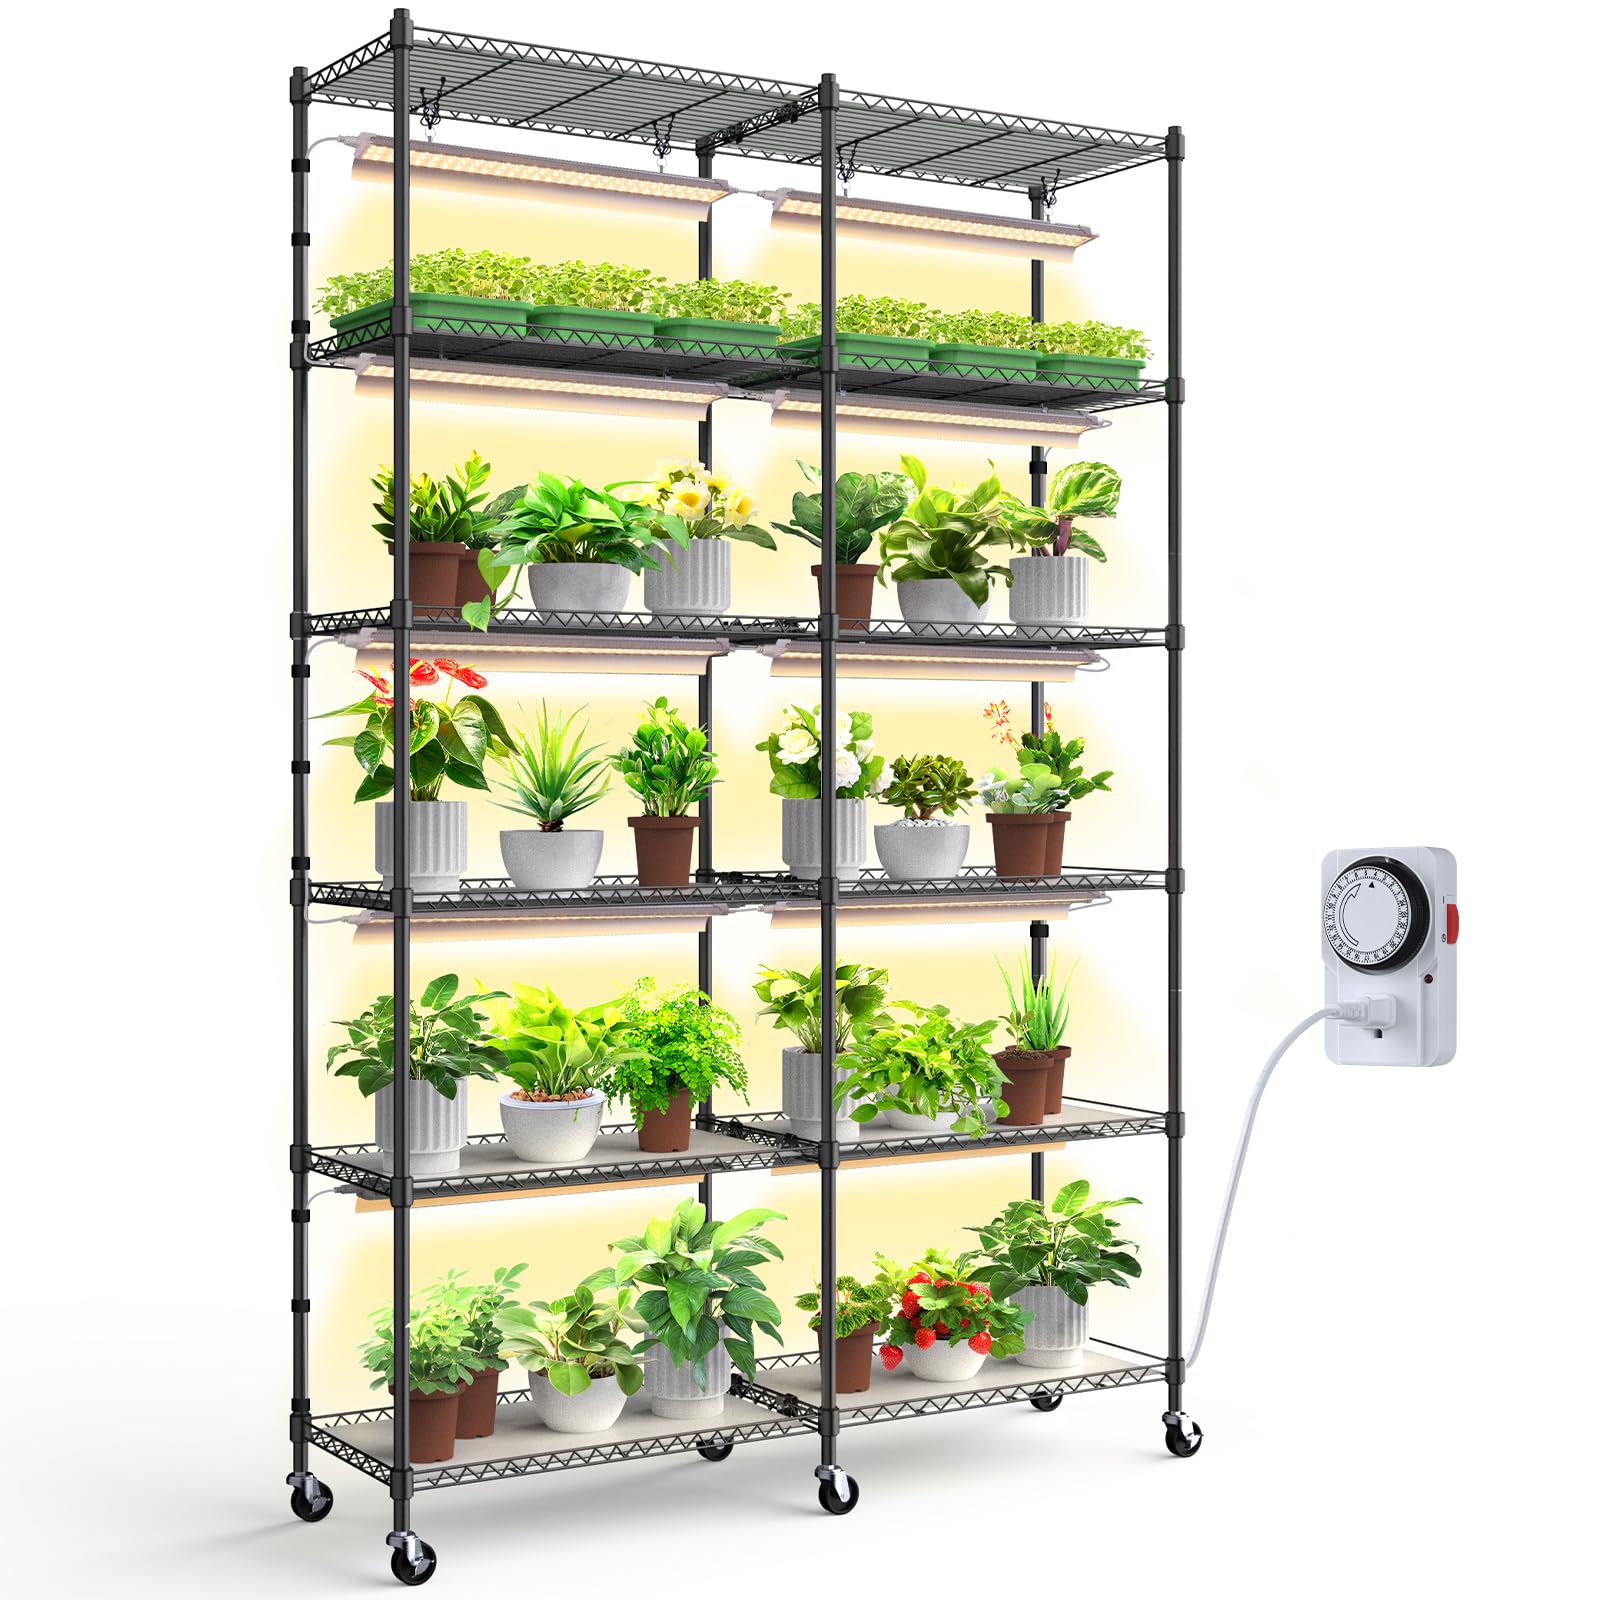 6 - Tier Plant Stand with 2020T LED Grow Lights,47x13.8x71IN,20W,10 lights,CJ20LCR - Barrina led